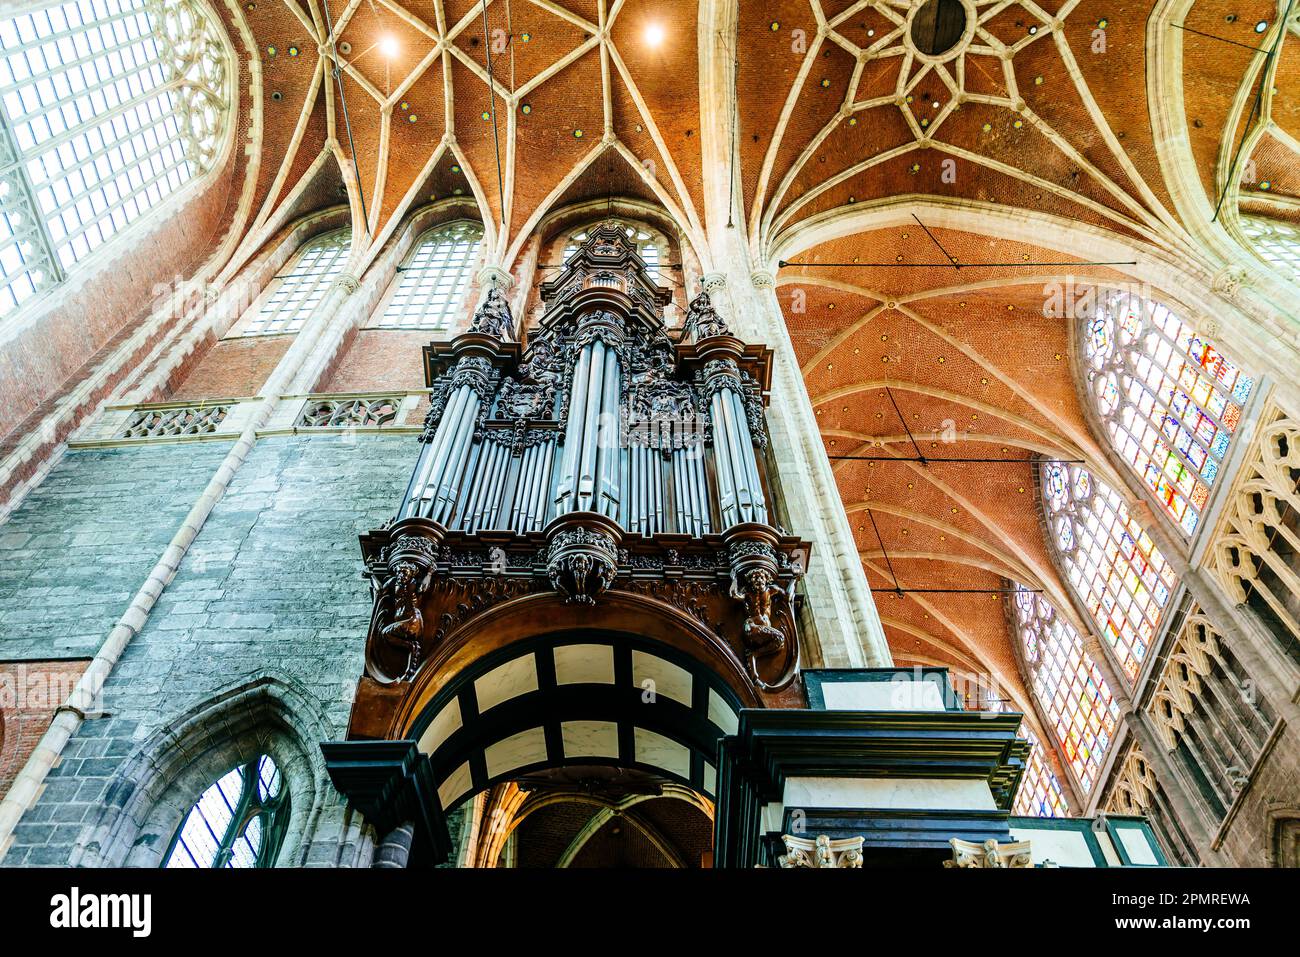 The great organ built in 1935 by Klais is the biggest of the Benelux. St Bavo's Cathedral, interior. Ghent, East Flanders, Flemish Region, Belgium, Eu Stock Photo